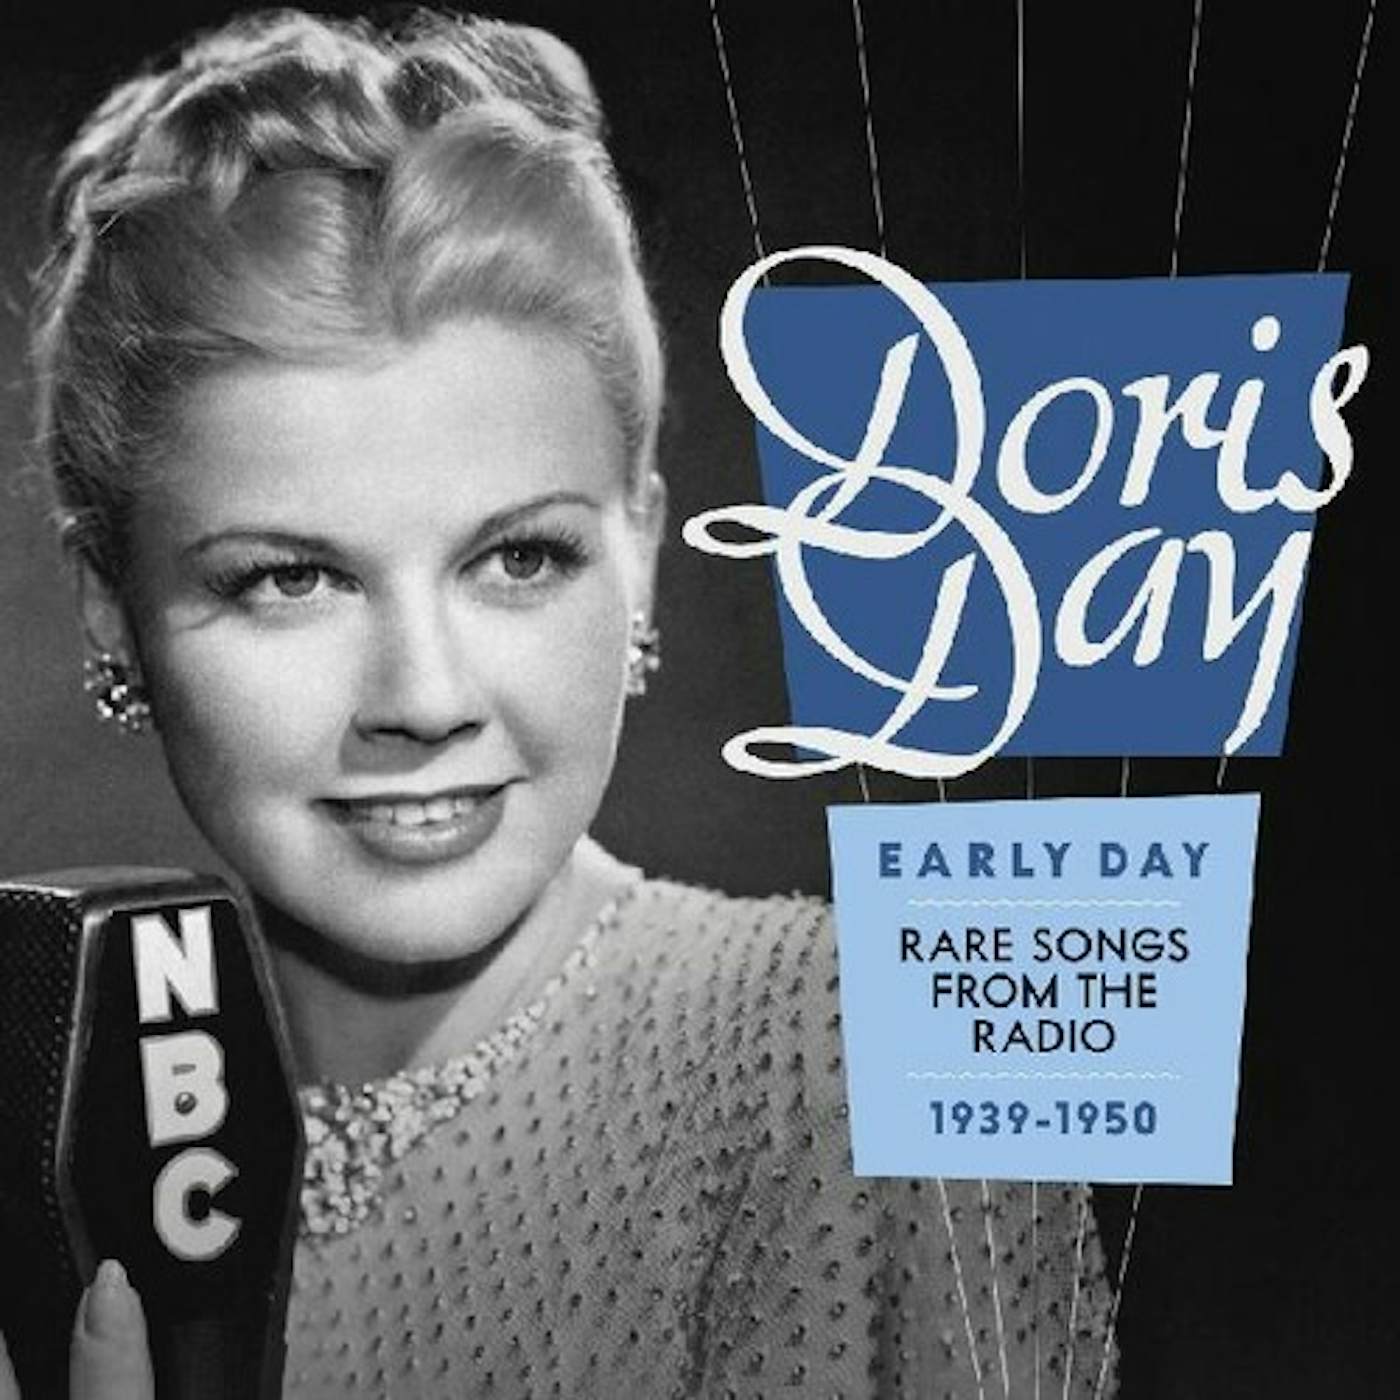 Doris Day EARLY DAY - RARE SONGS FROM THE RADIO 1939-1950 CD